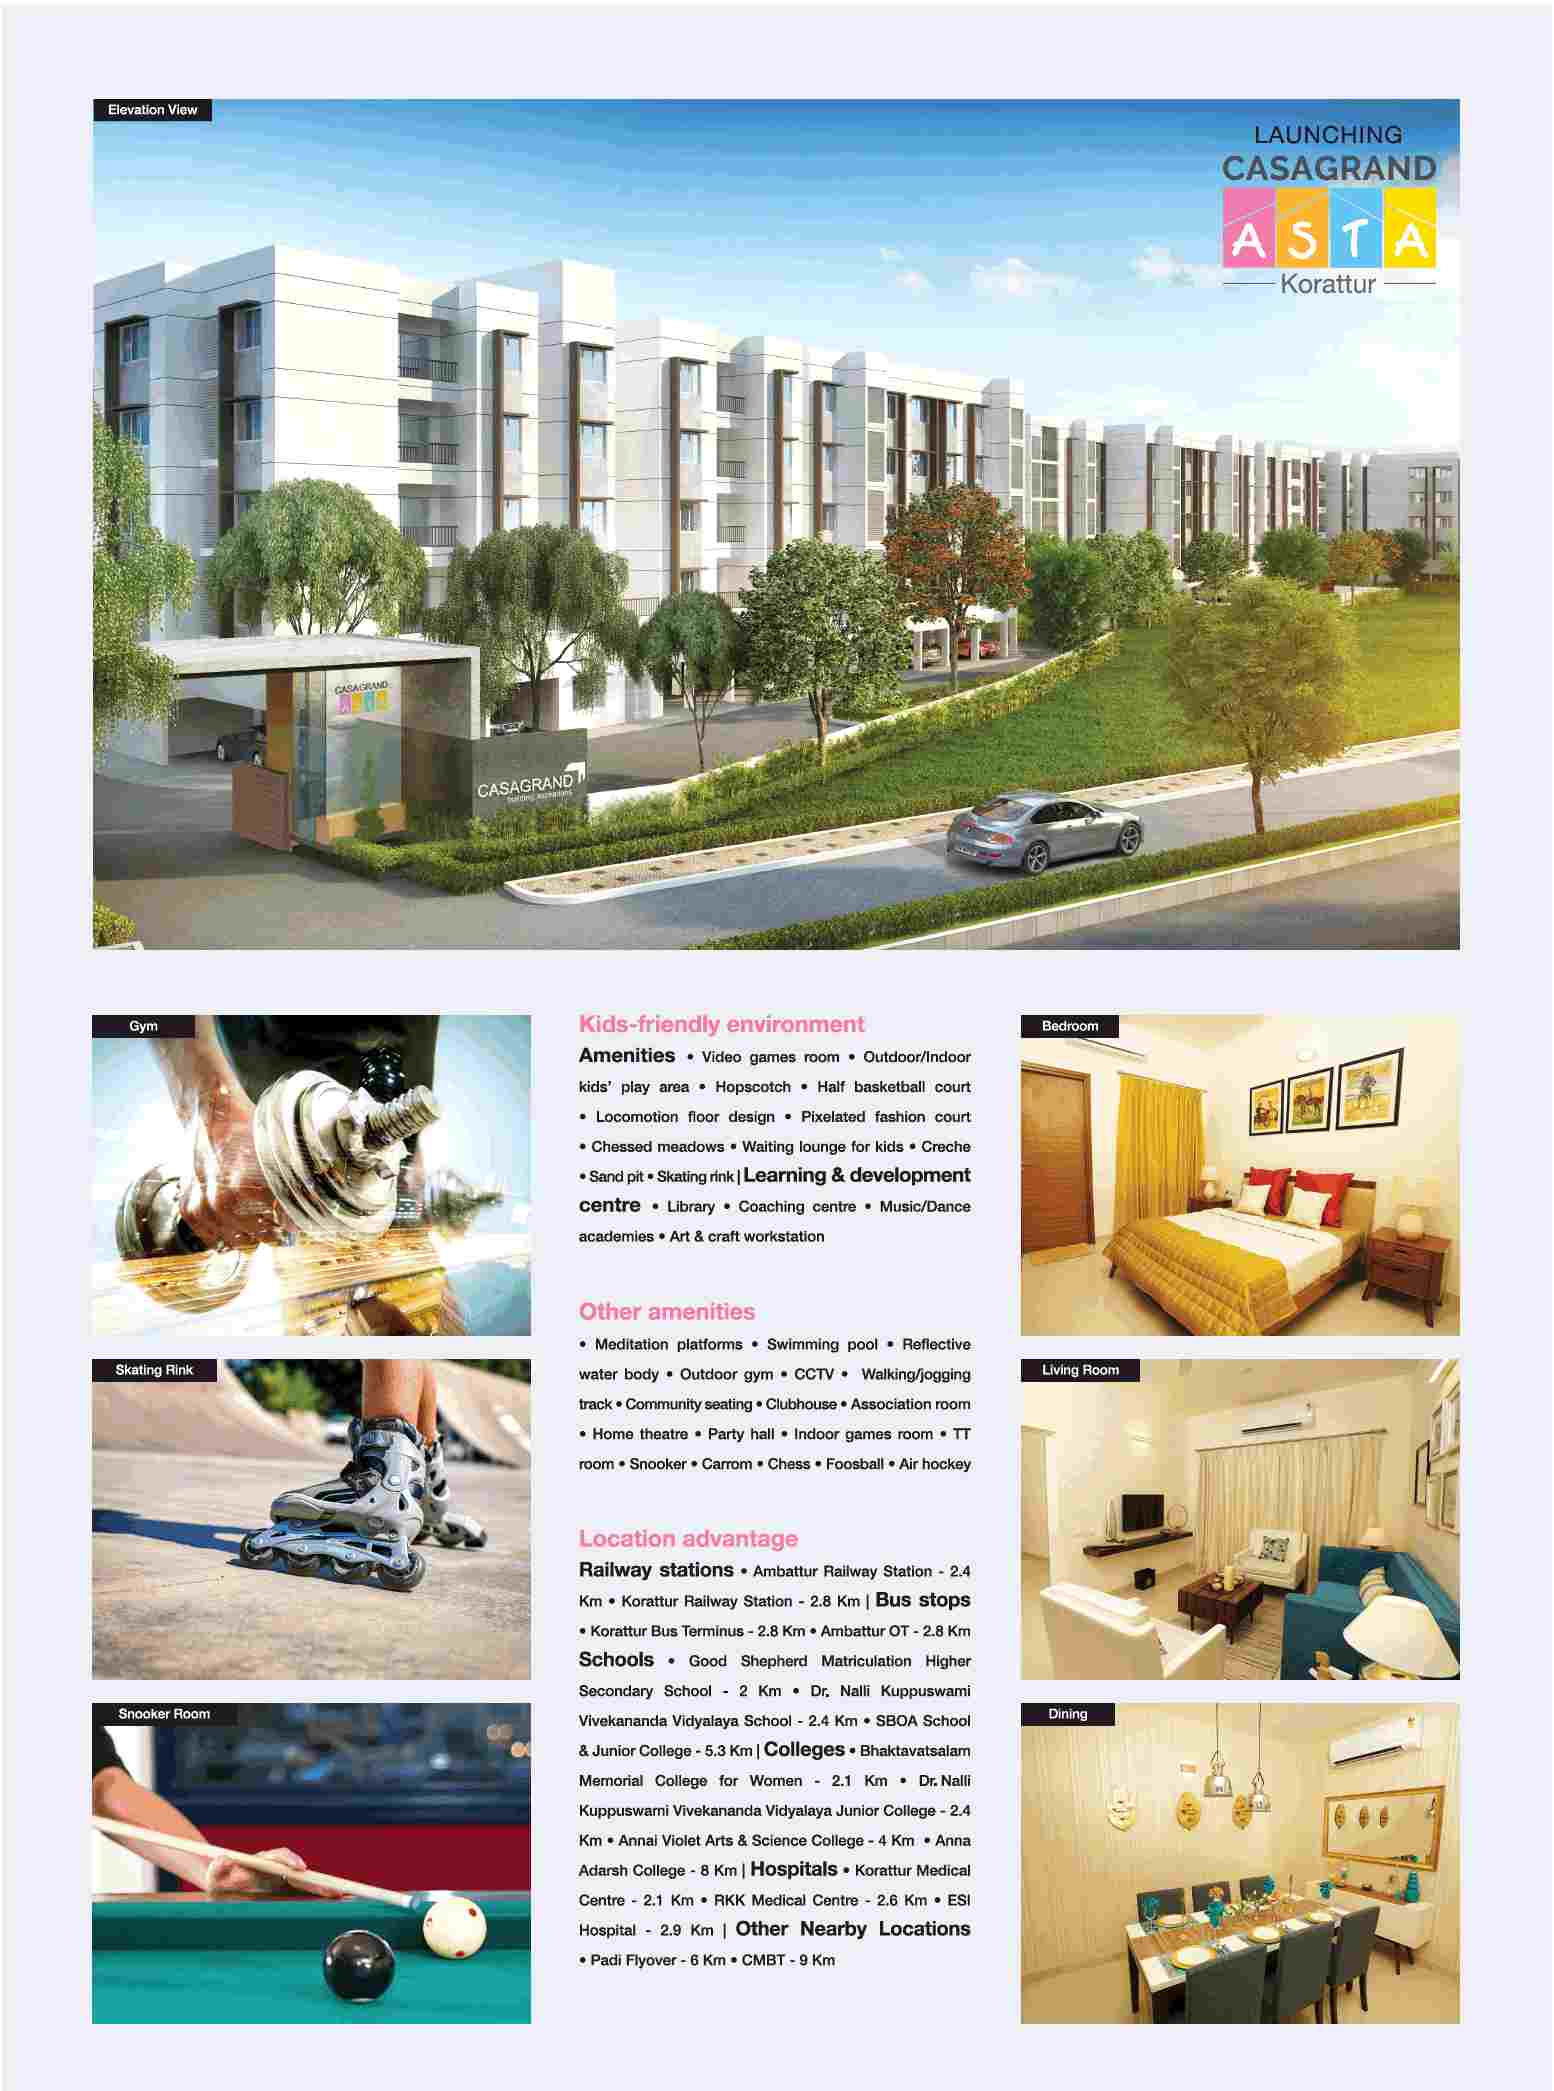 Live in Casagrand Asta and experience the world-class amenities in Chennai